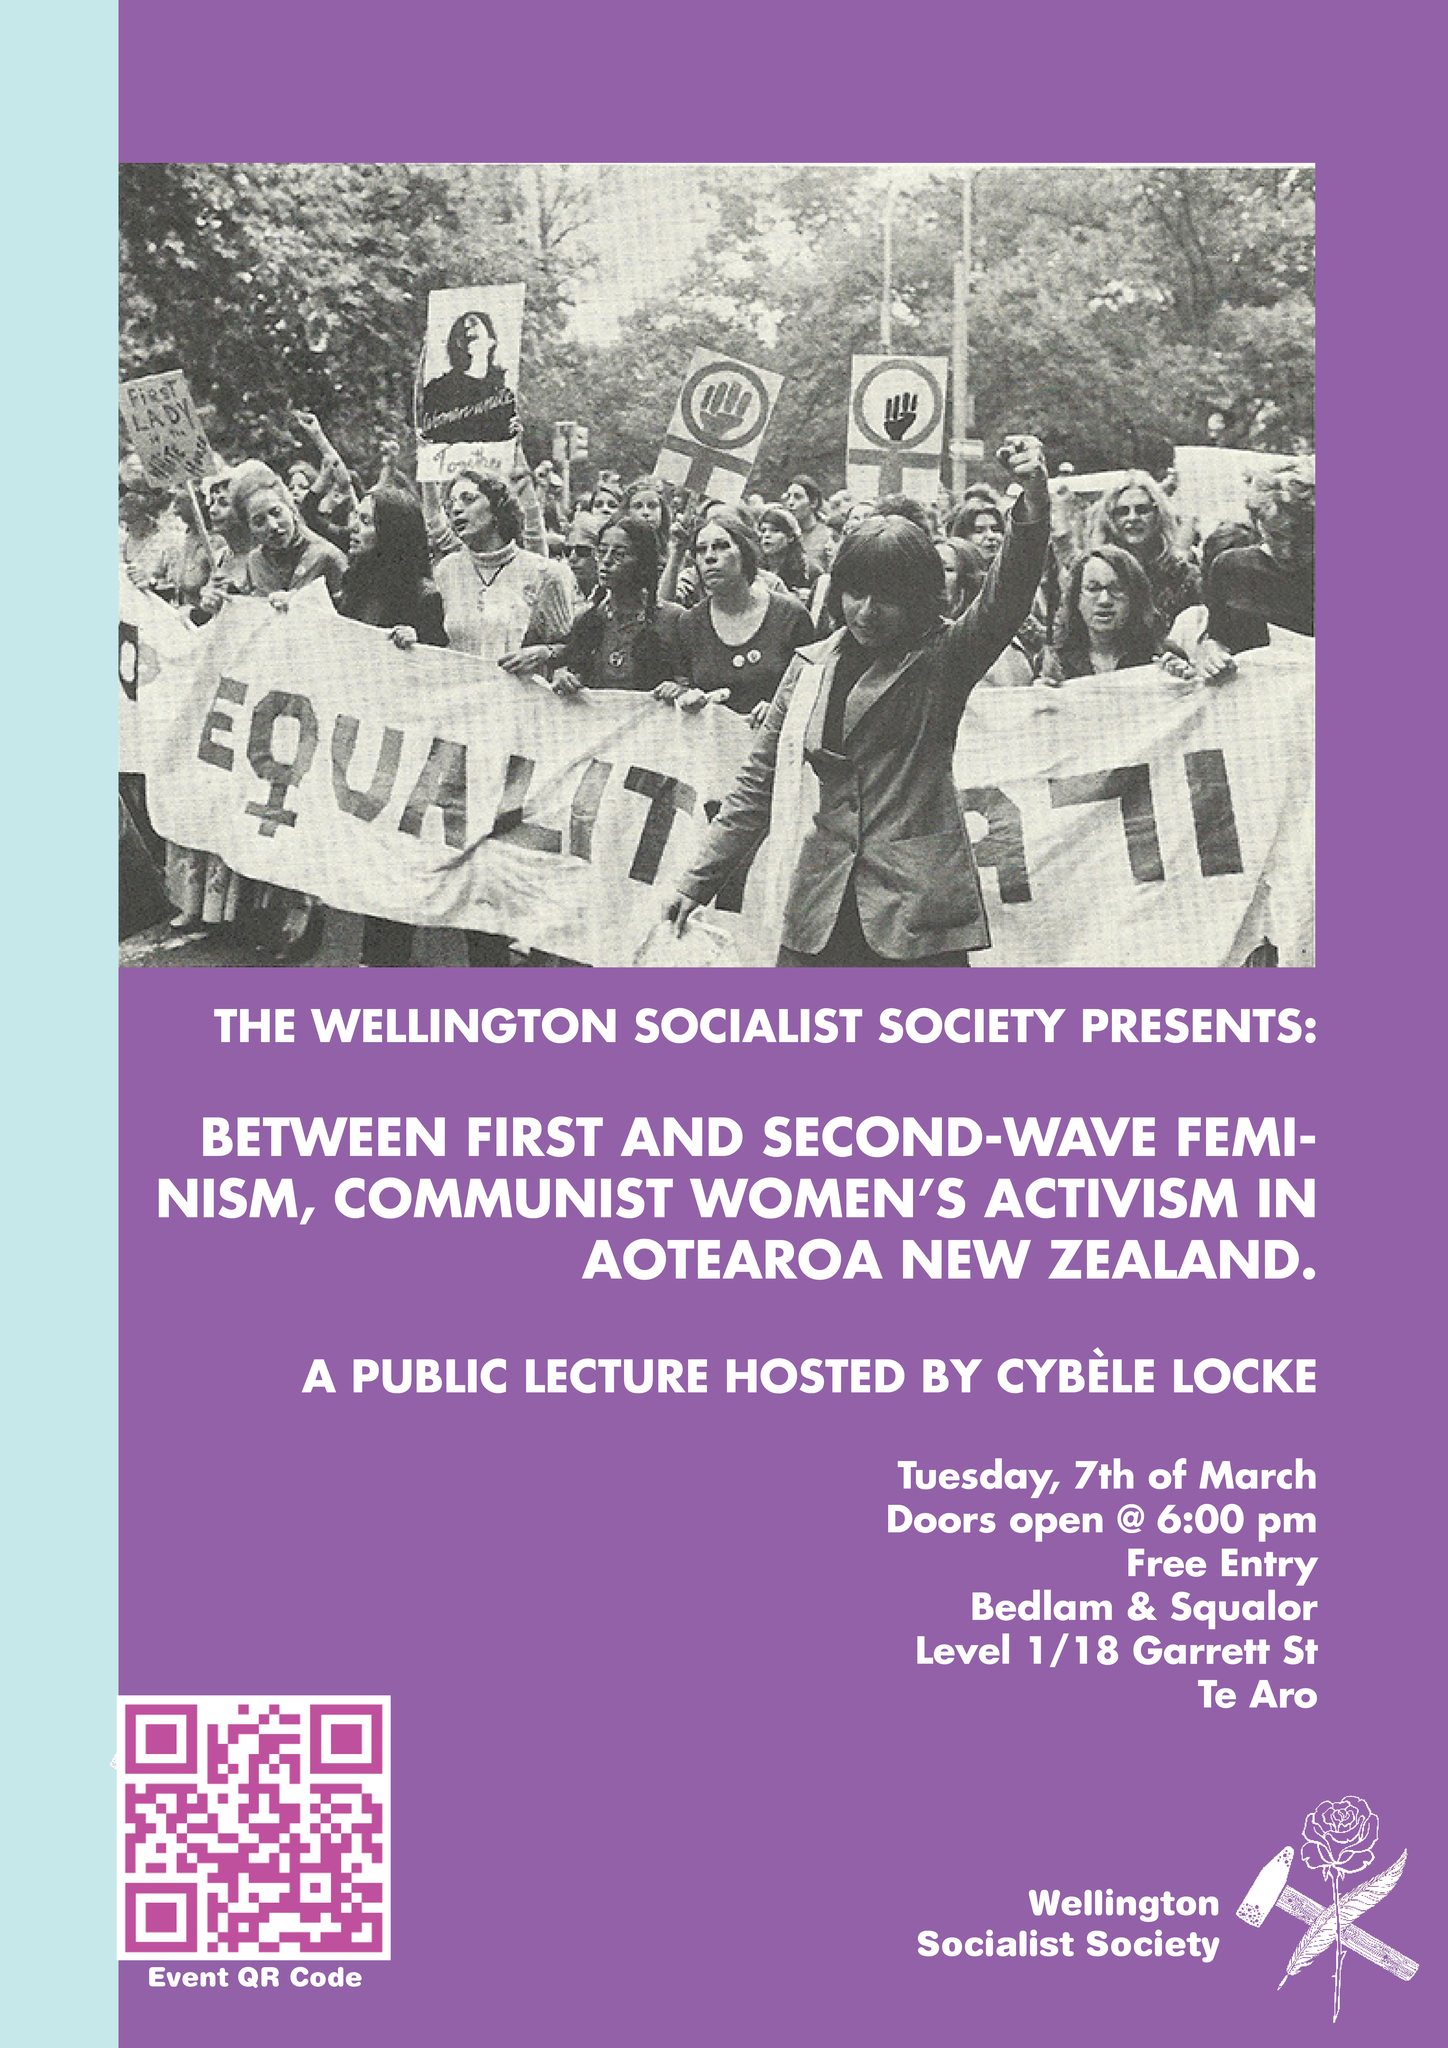 Between First and Second-Wave Feminism, Communist Women’s Activism in Aotearoa New Zealand.